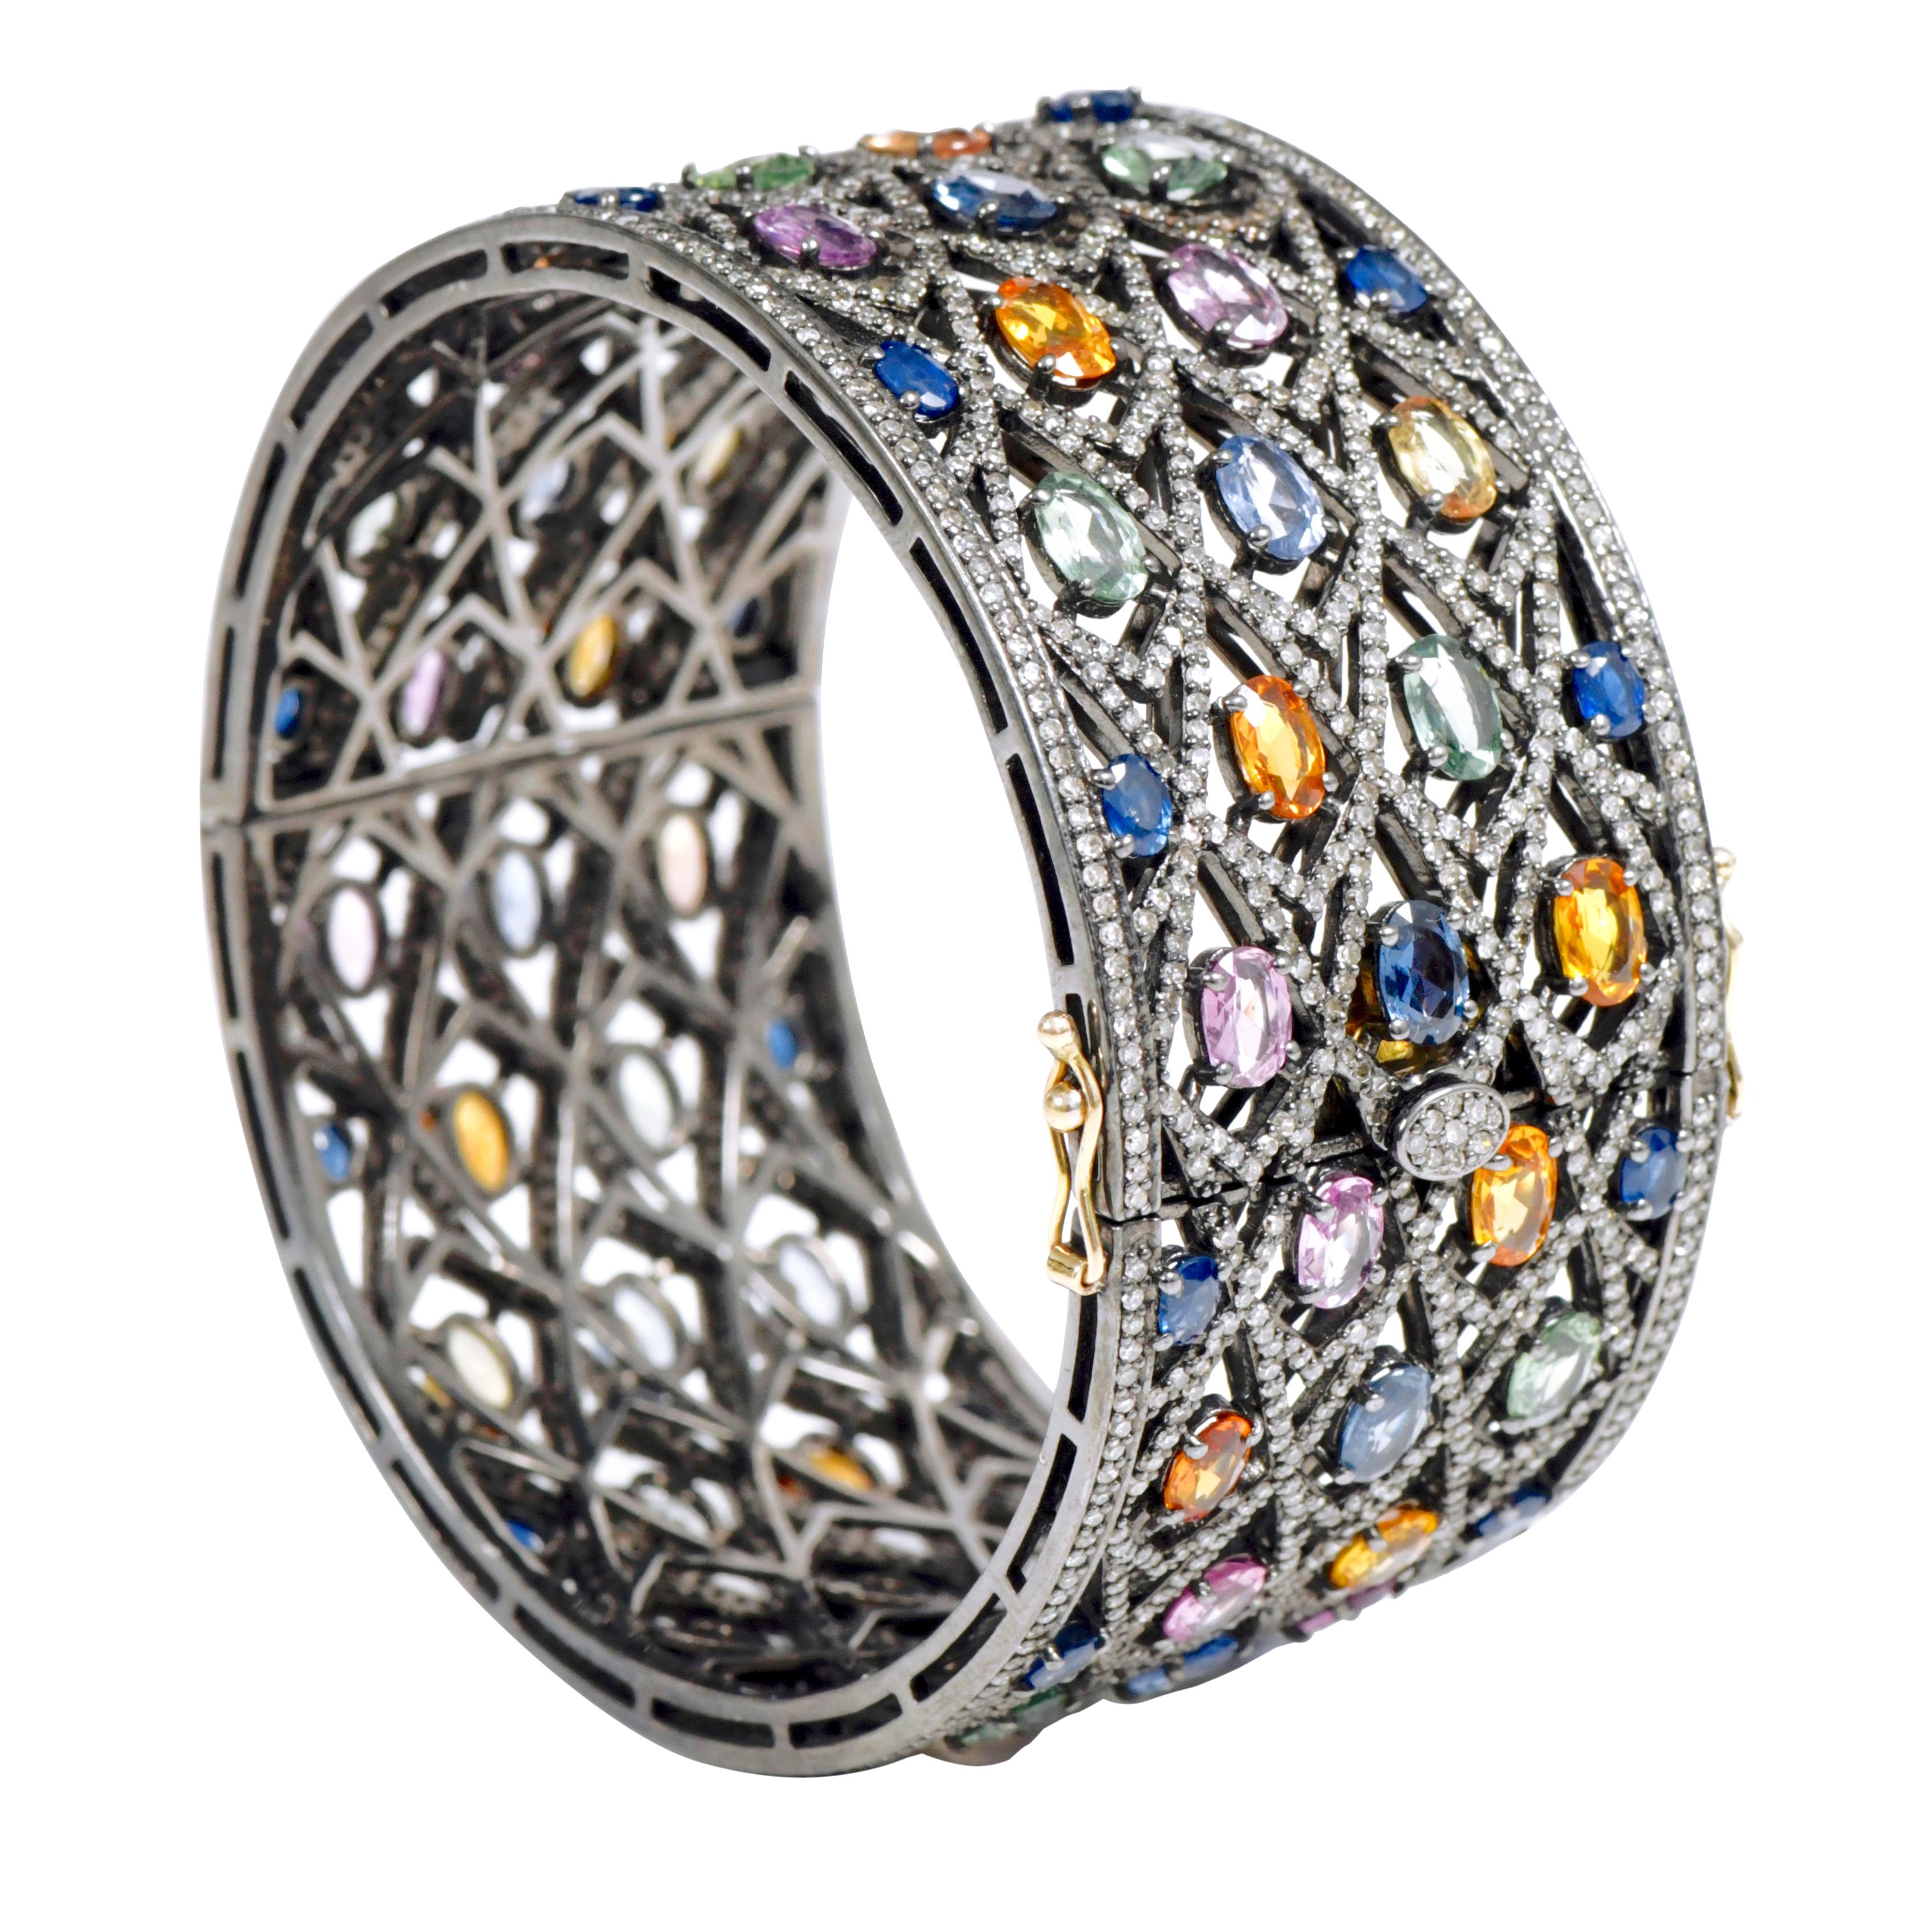 Rainbow Multi-Sapphire and Diamond Bangle in Art-Deco Victorian Style

A modern reverie of colors, this multicolored bangle is a modern amalgamation of heritage and excellent craftsmanship. Featuring a criss-cross design encrusted with diamonds,